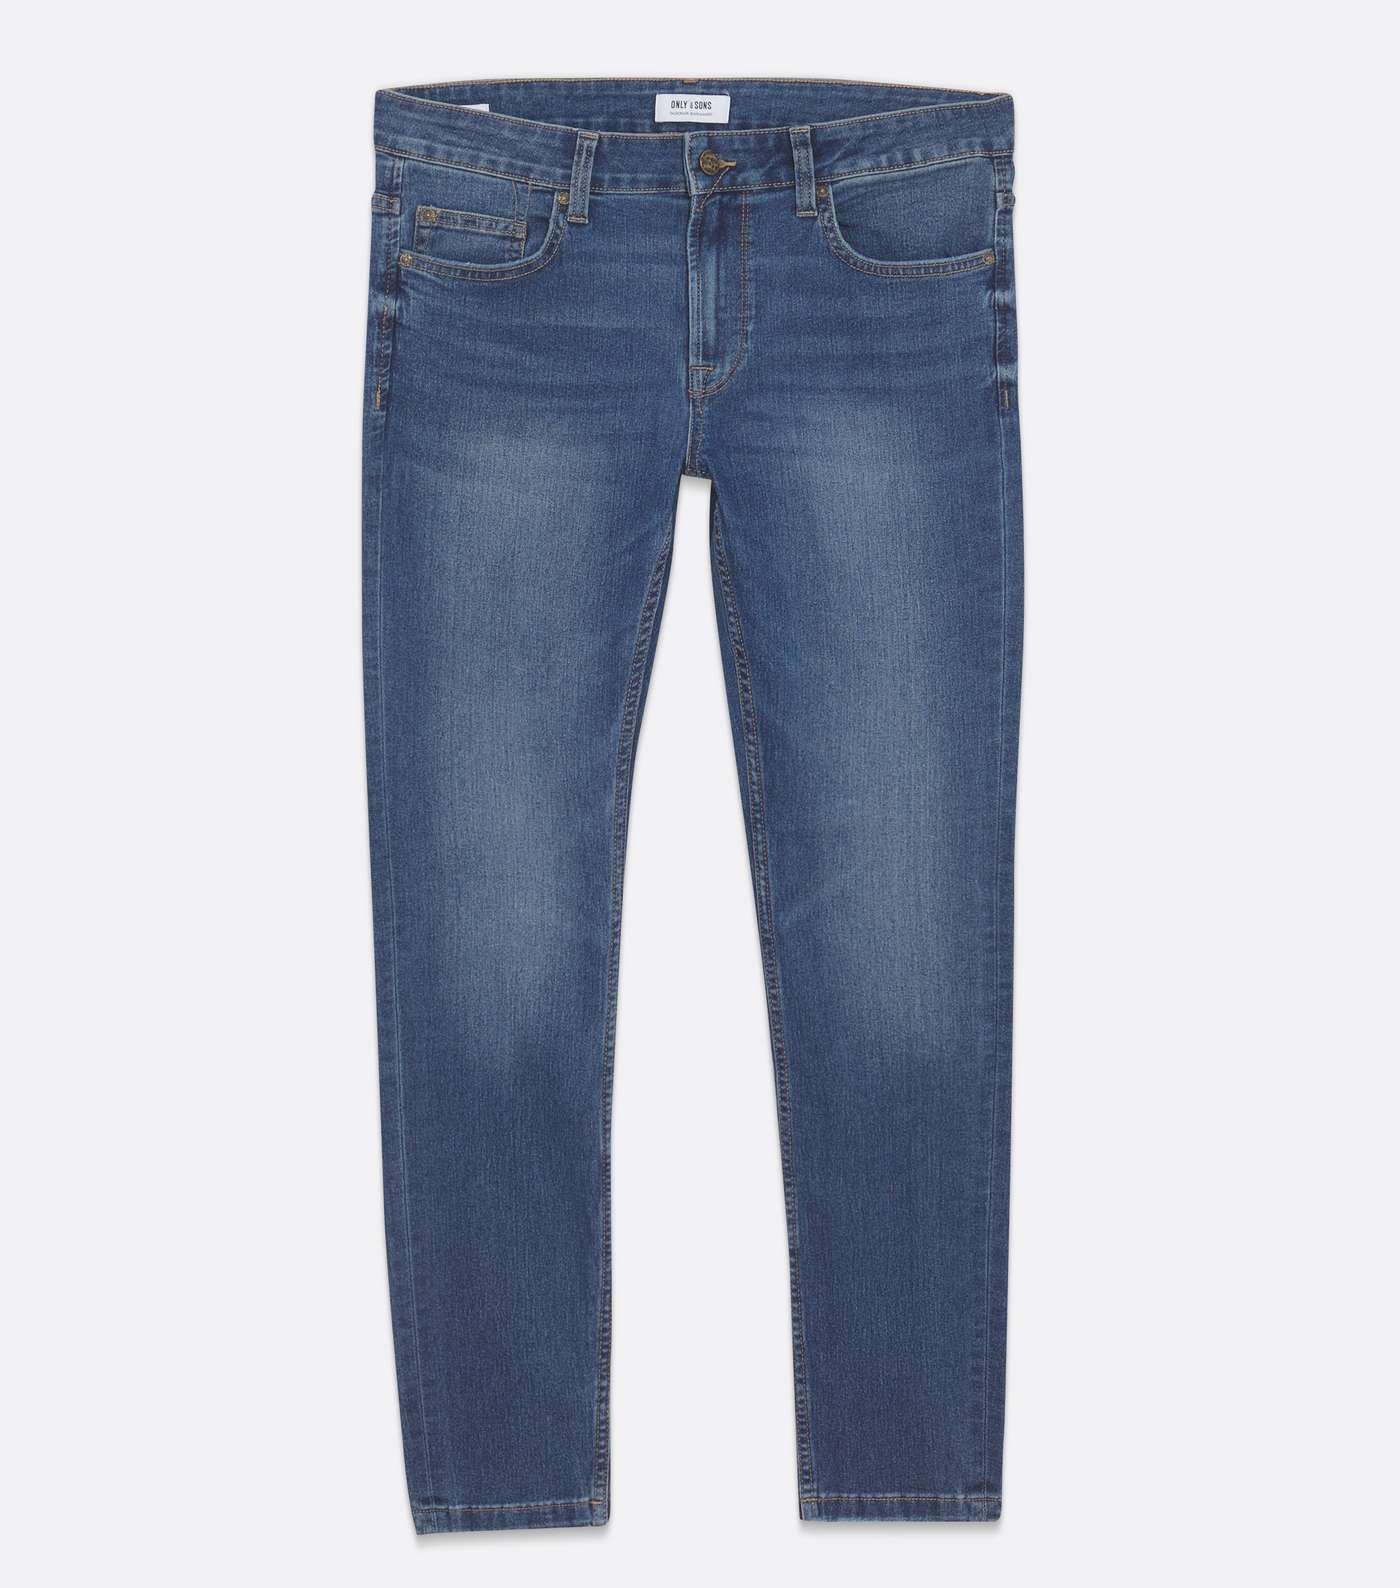 Only & Sons Blue Mid Wash Skinny Jeans Image 5